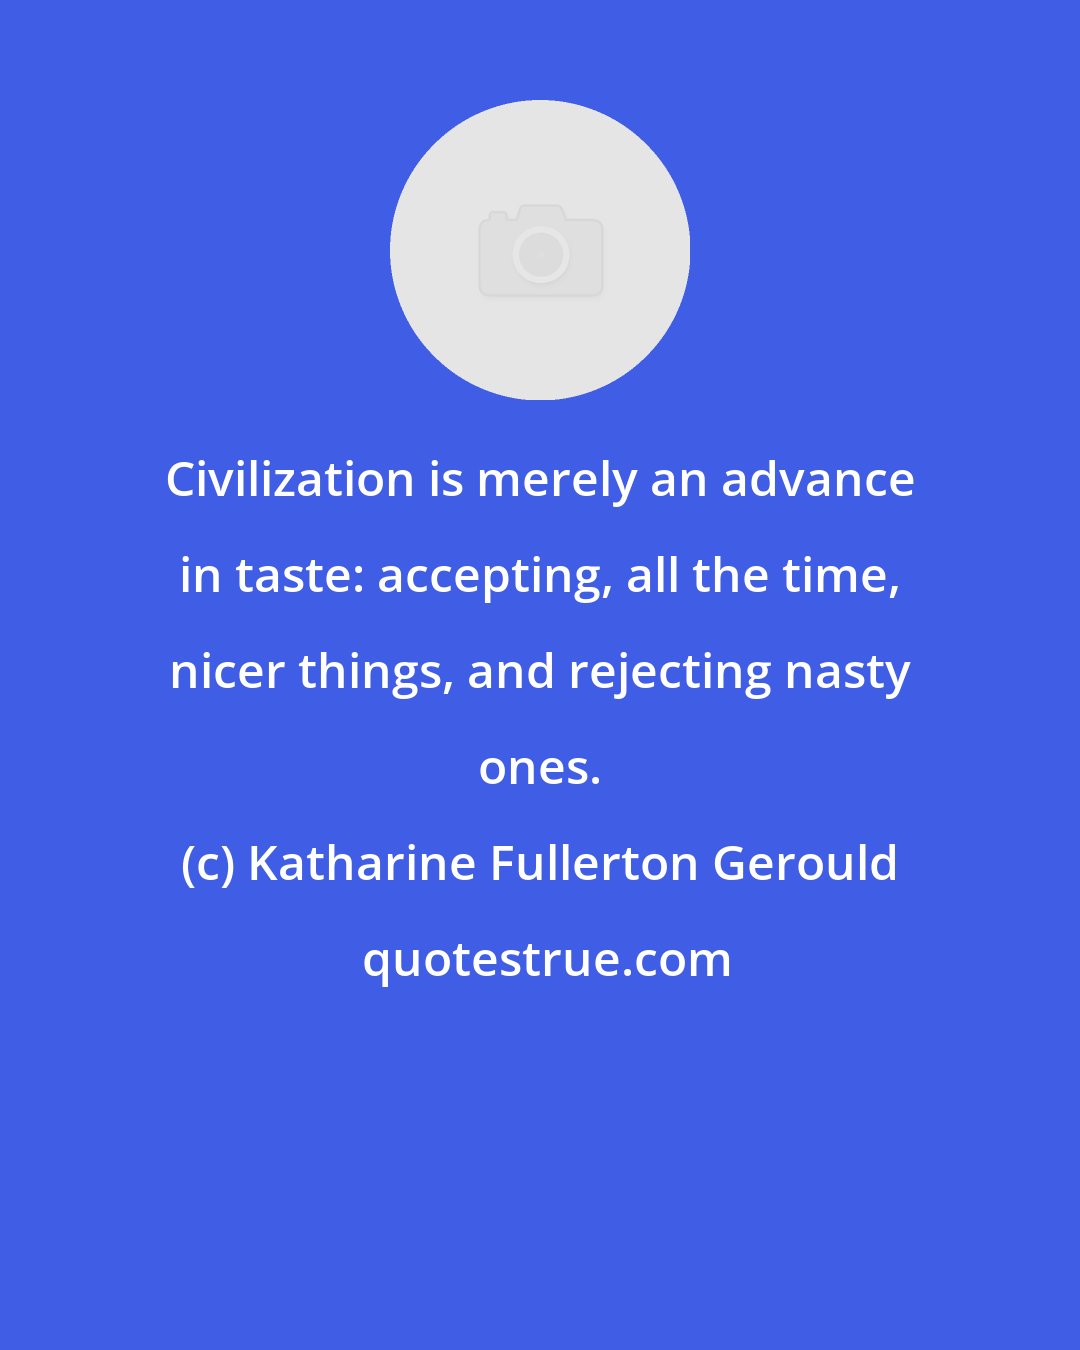 Katharine Fullerton Gerould: Civilization is merely an advance in taste: accepting, all the time, nicer things, and rejecting nasty ones.